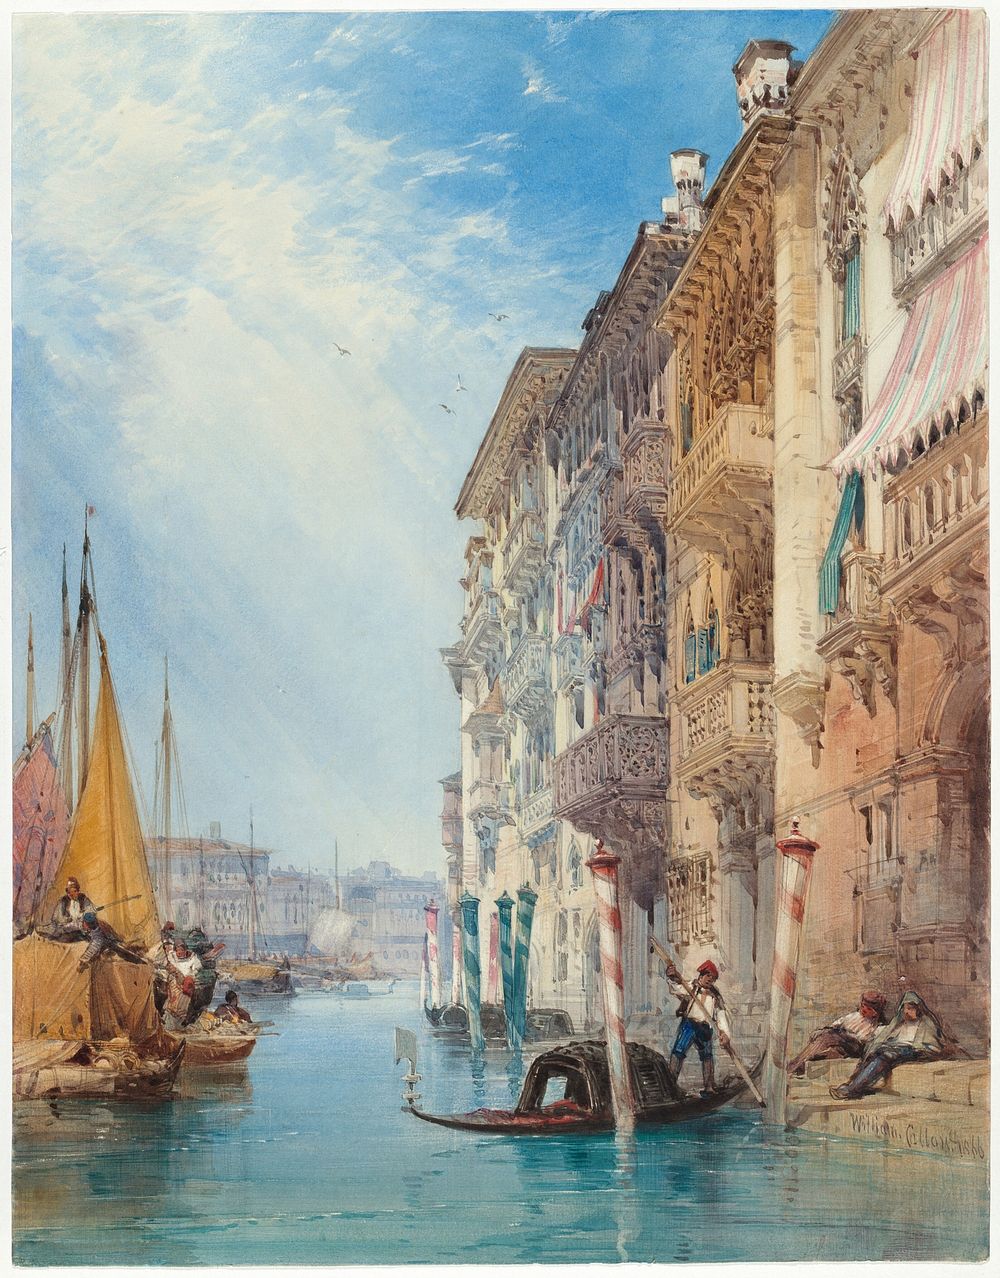 A Gondola on the Grand Canal, Venice (1866) by William Callow.  